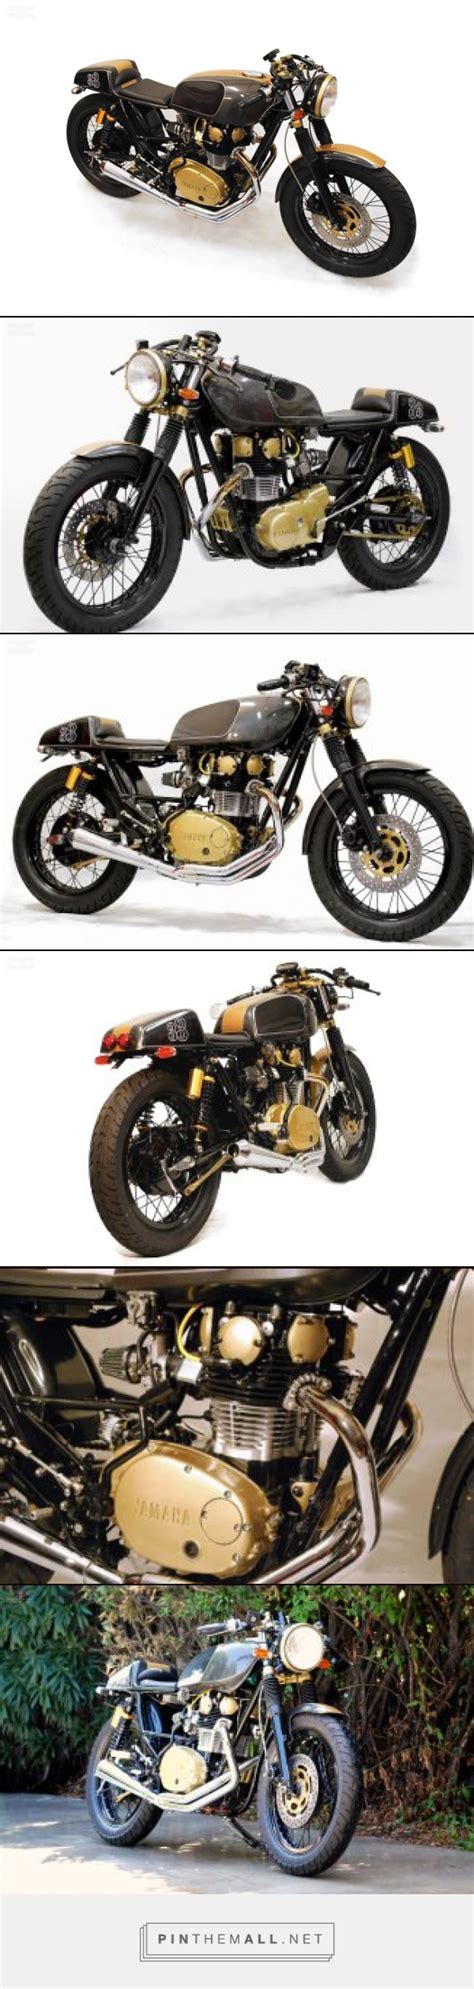 Yamaha Xs650 Cafe Racer By Chappell Customs Created Via